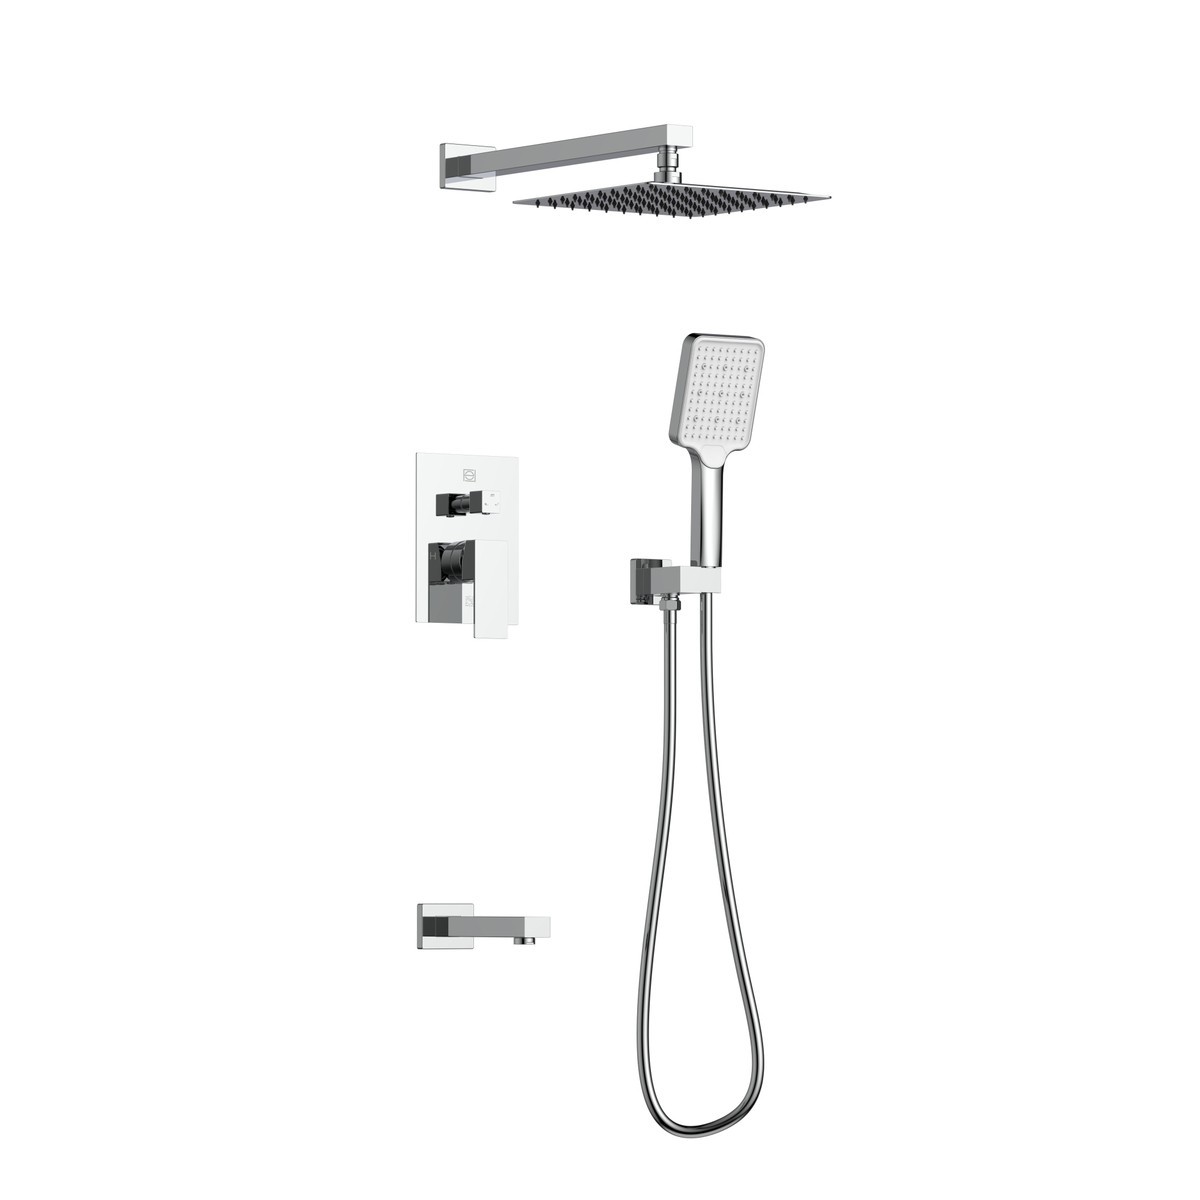 ELEGANT FURNITURE LIGHTING FAS-9004 PETAR 8 INCH COMPLETE SHOWER SYSTEM WITH TUB SPOUT AND ROUGH-IN VALVE